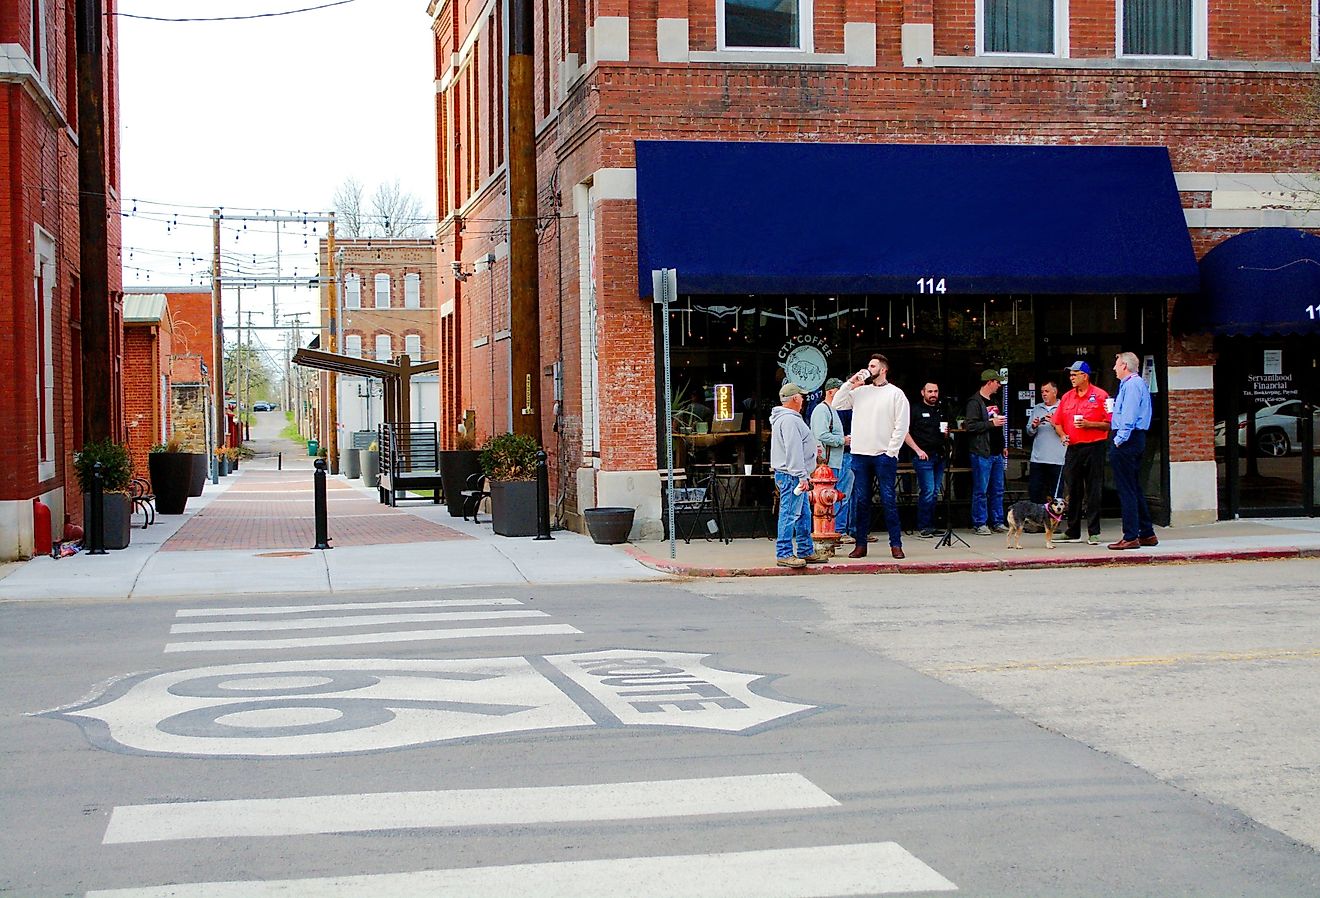 People outside coffee shop on Route 66 at CTX Coffee in Sapulpa, OK. Image credit Richard Affolder via Shutterstock.